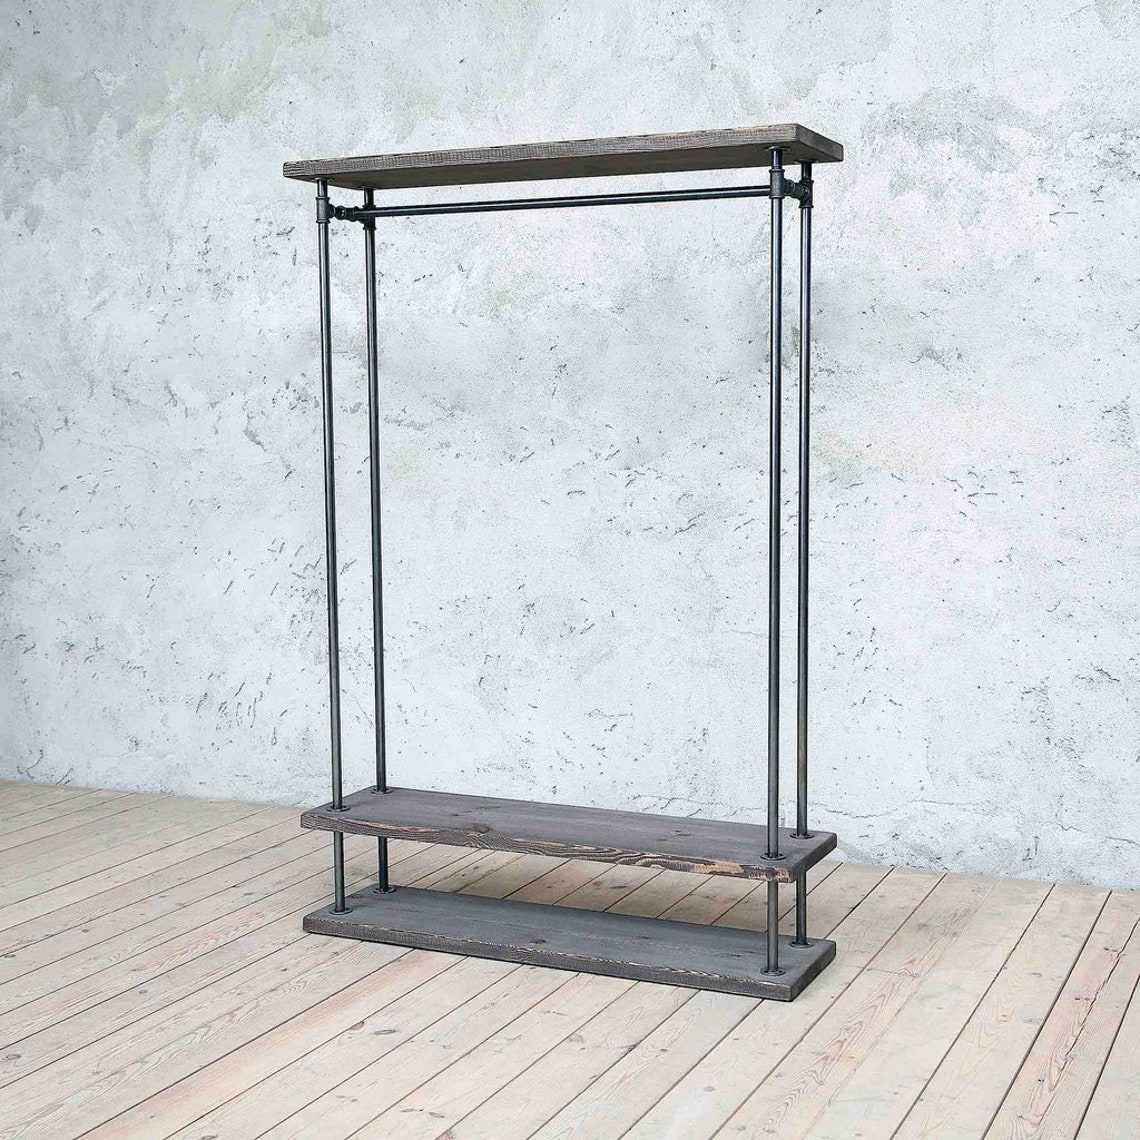 Tweed Two Shelves Industrial Clothes Rail Clothes Rack - Etsy